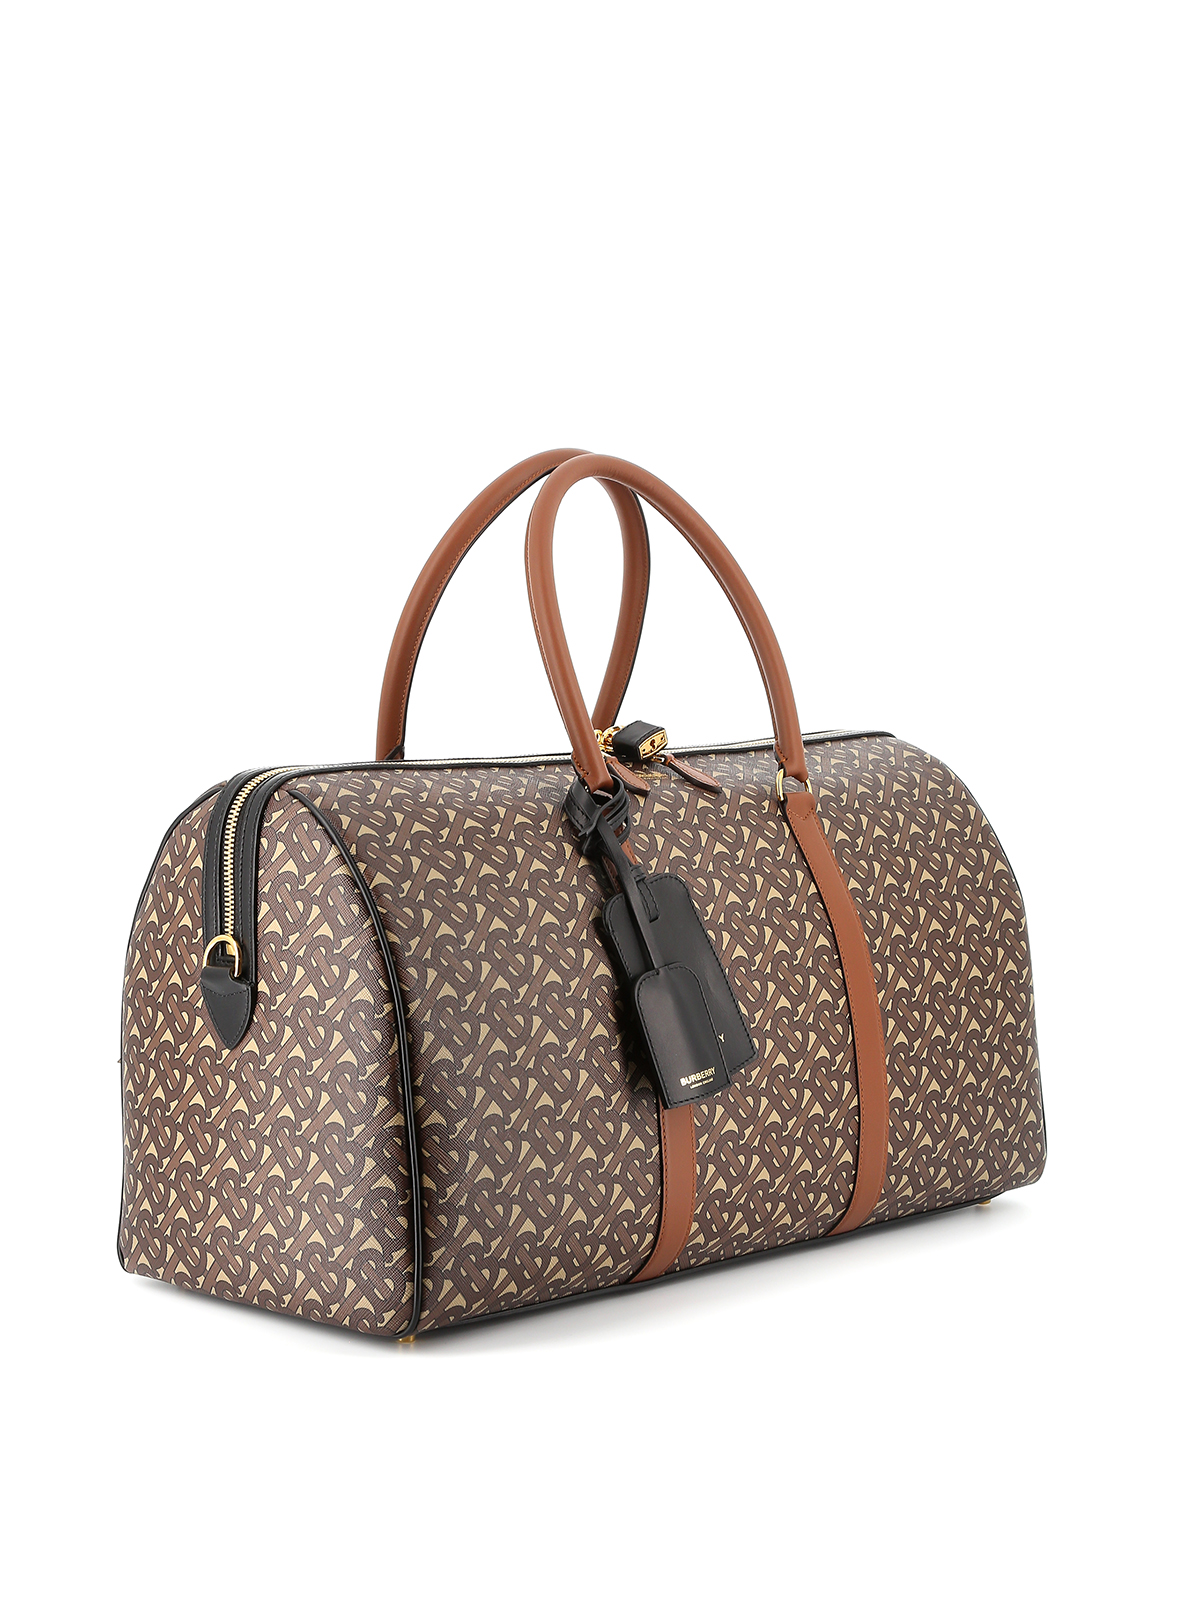 burberry carry on luggage